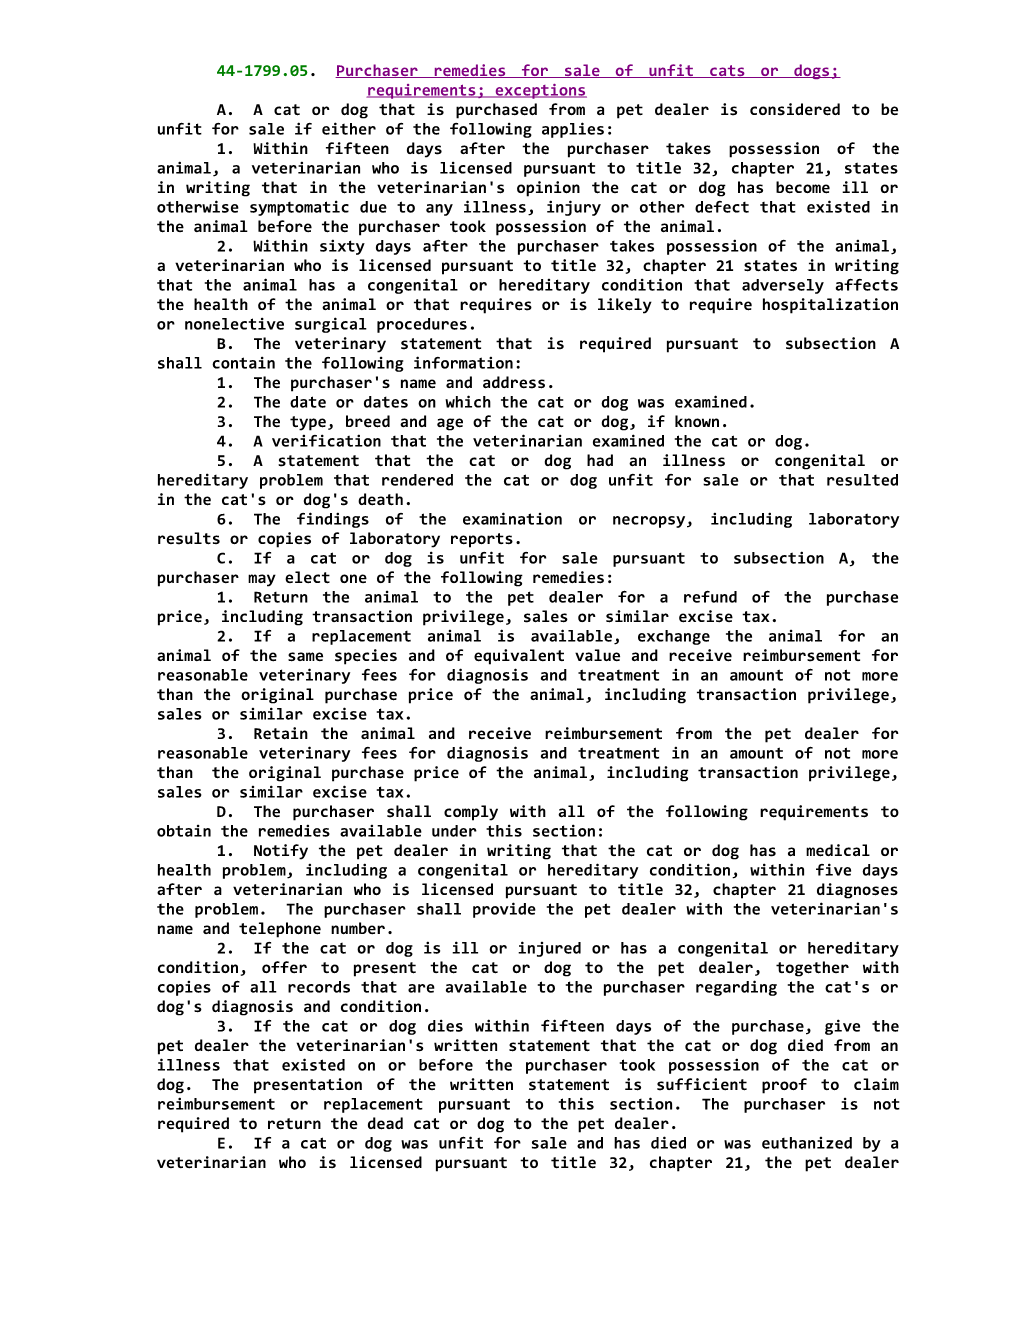 START STATUTE44-1799.05.Purchaser Remedies for Sale of Unfit Cats Or Dogs; Requirements;